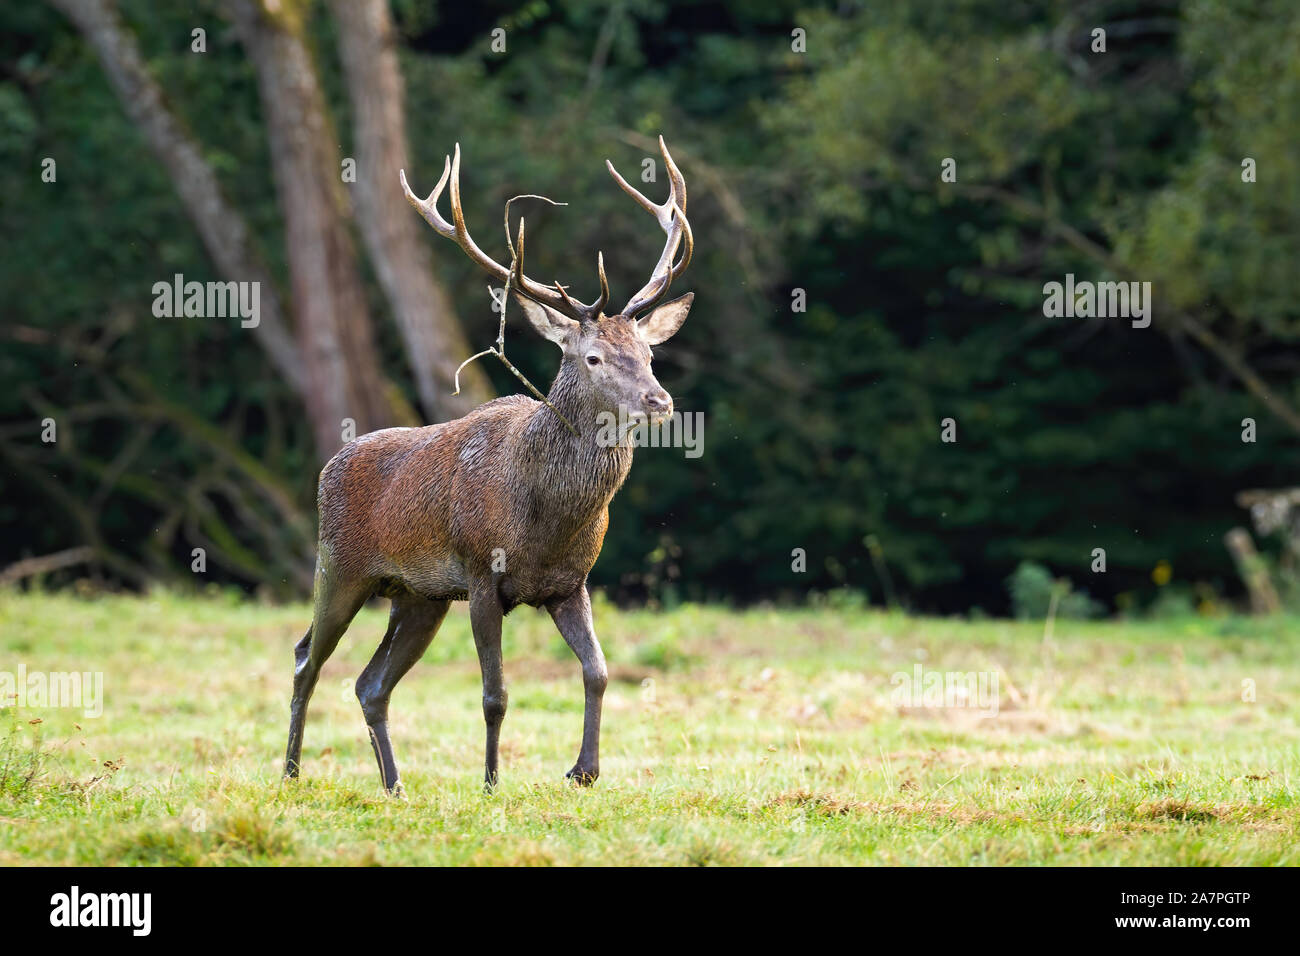 Majestic red deer stag passing in refreshing nature scenery with copy space. Stock Photo